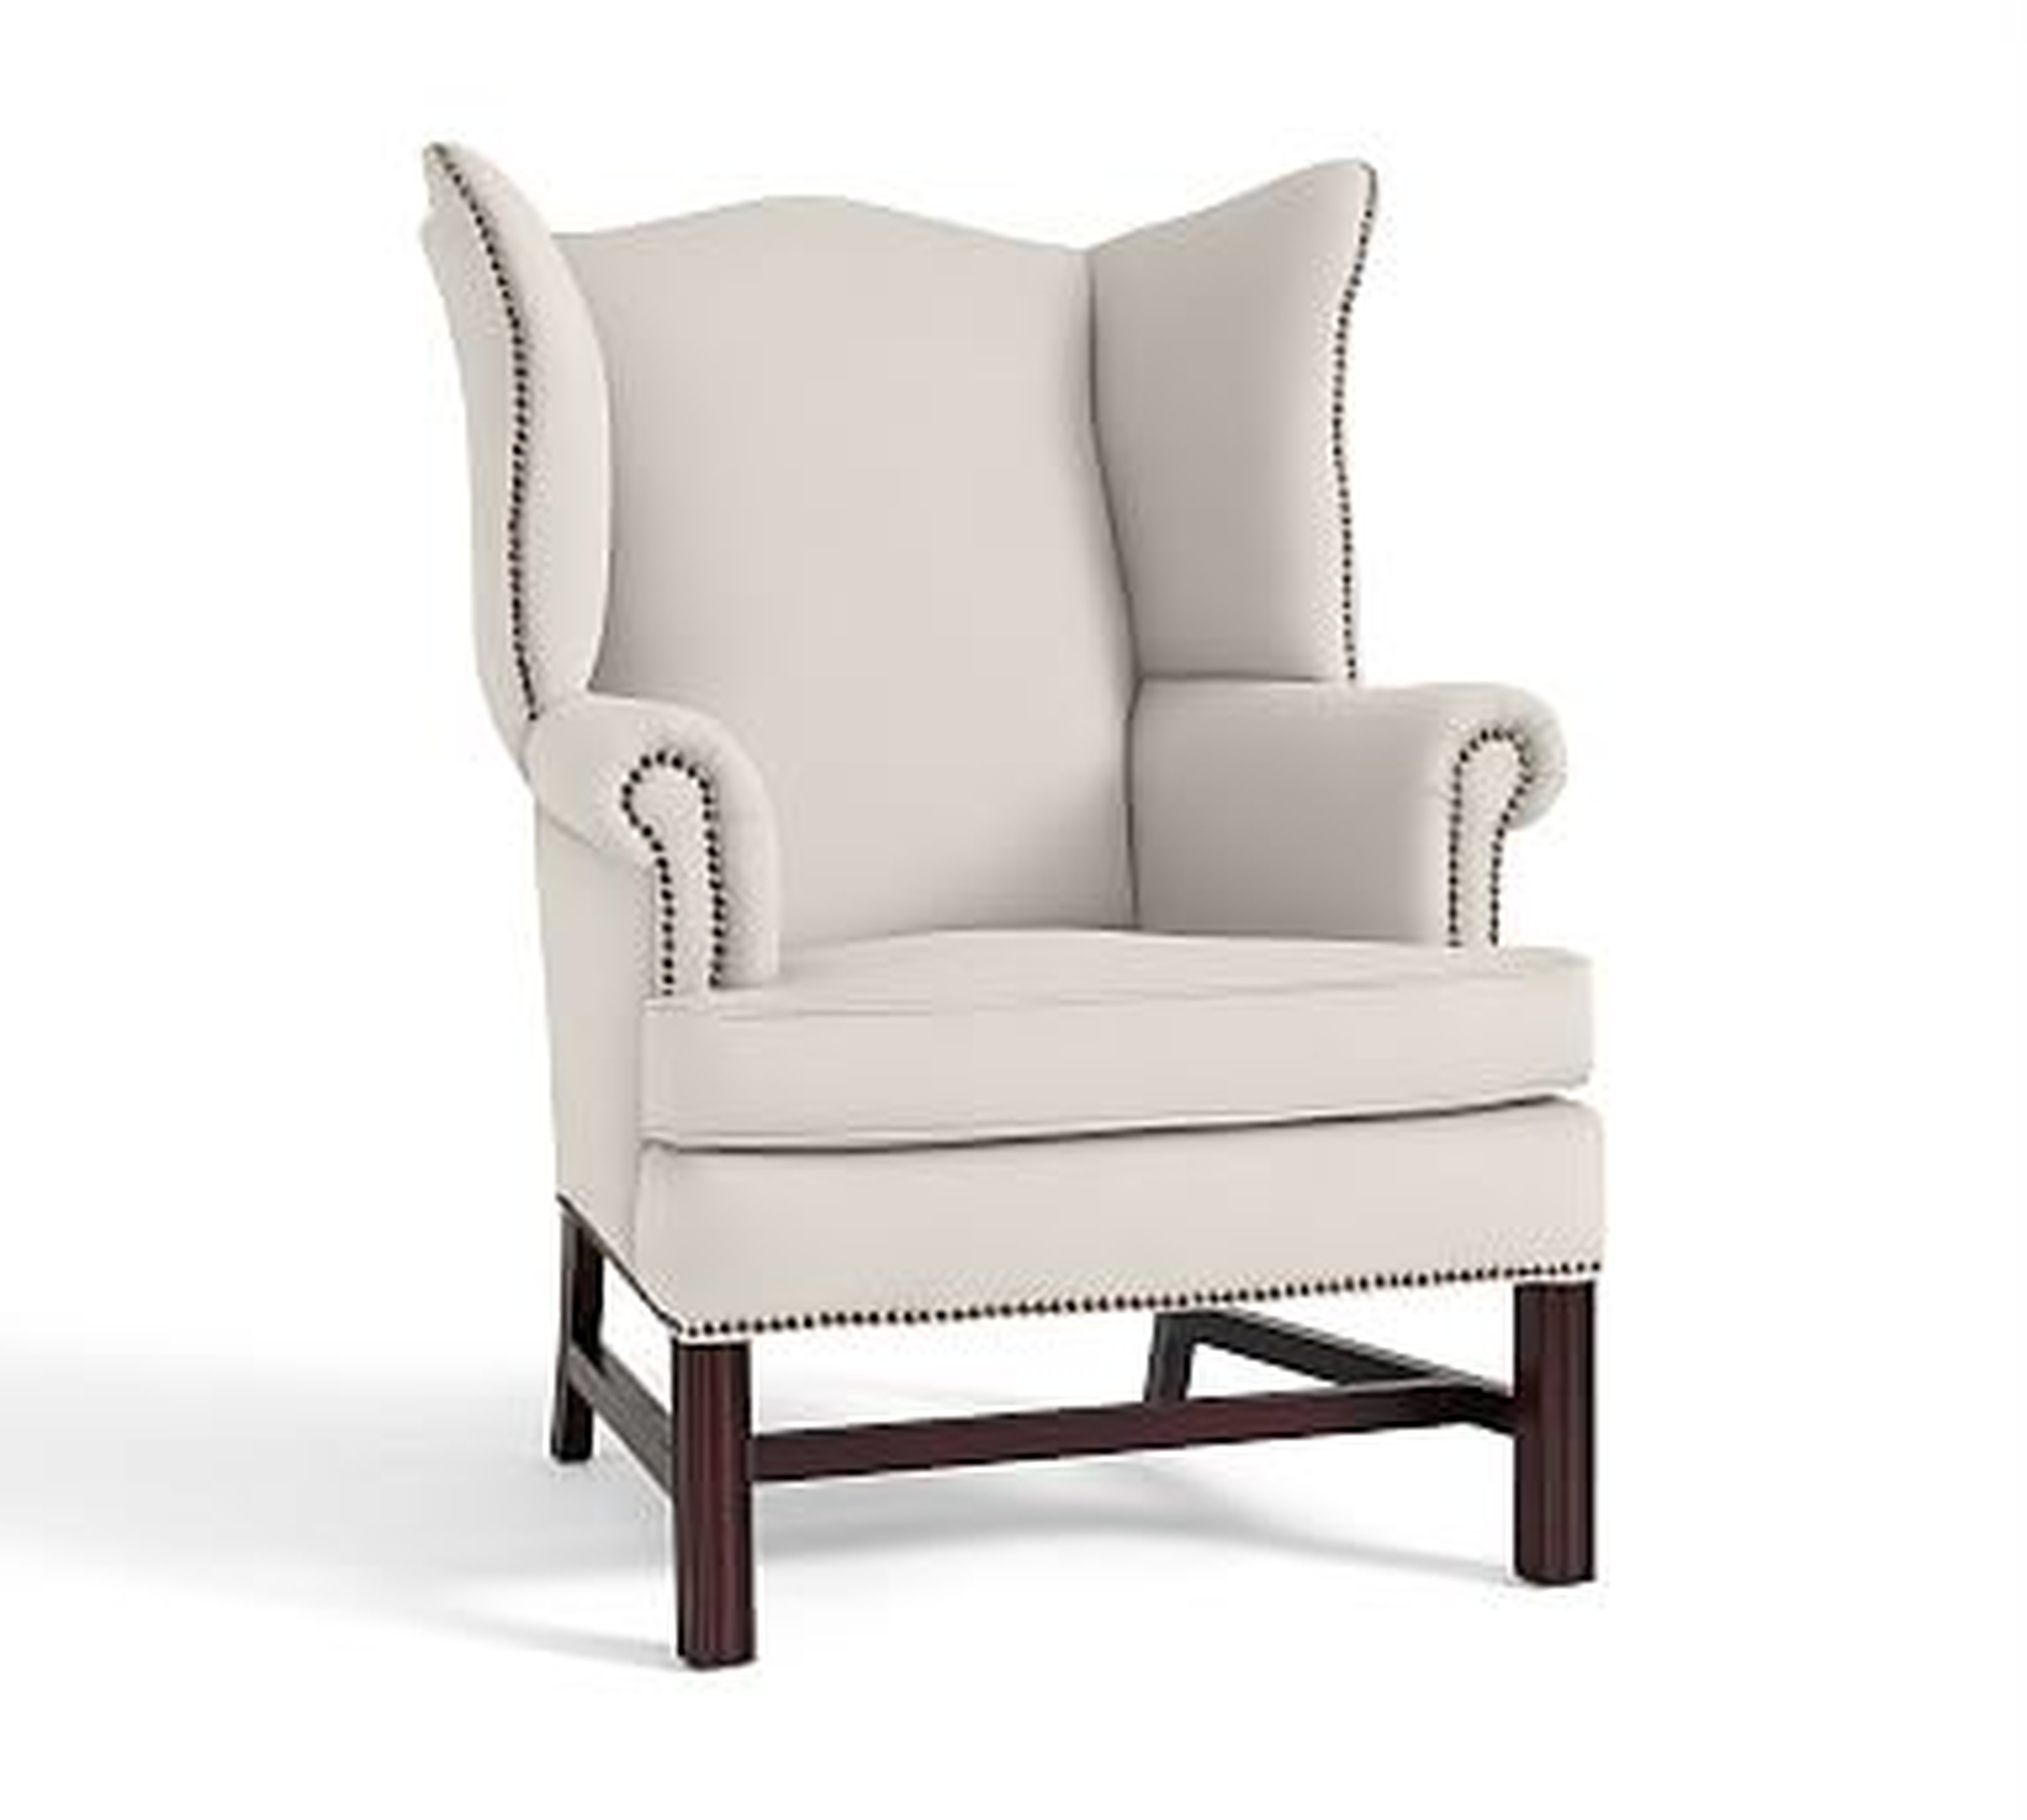 Thatcher Upholstered Armchair, Polyester Wrapped Cushions, Performance Twill Warm White - Pottery Barn